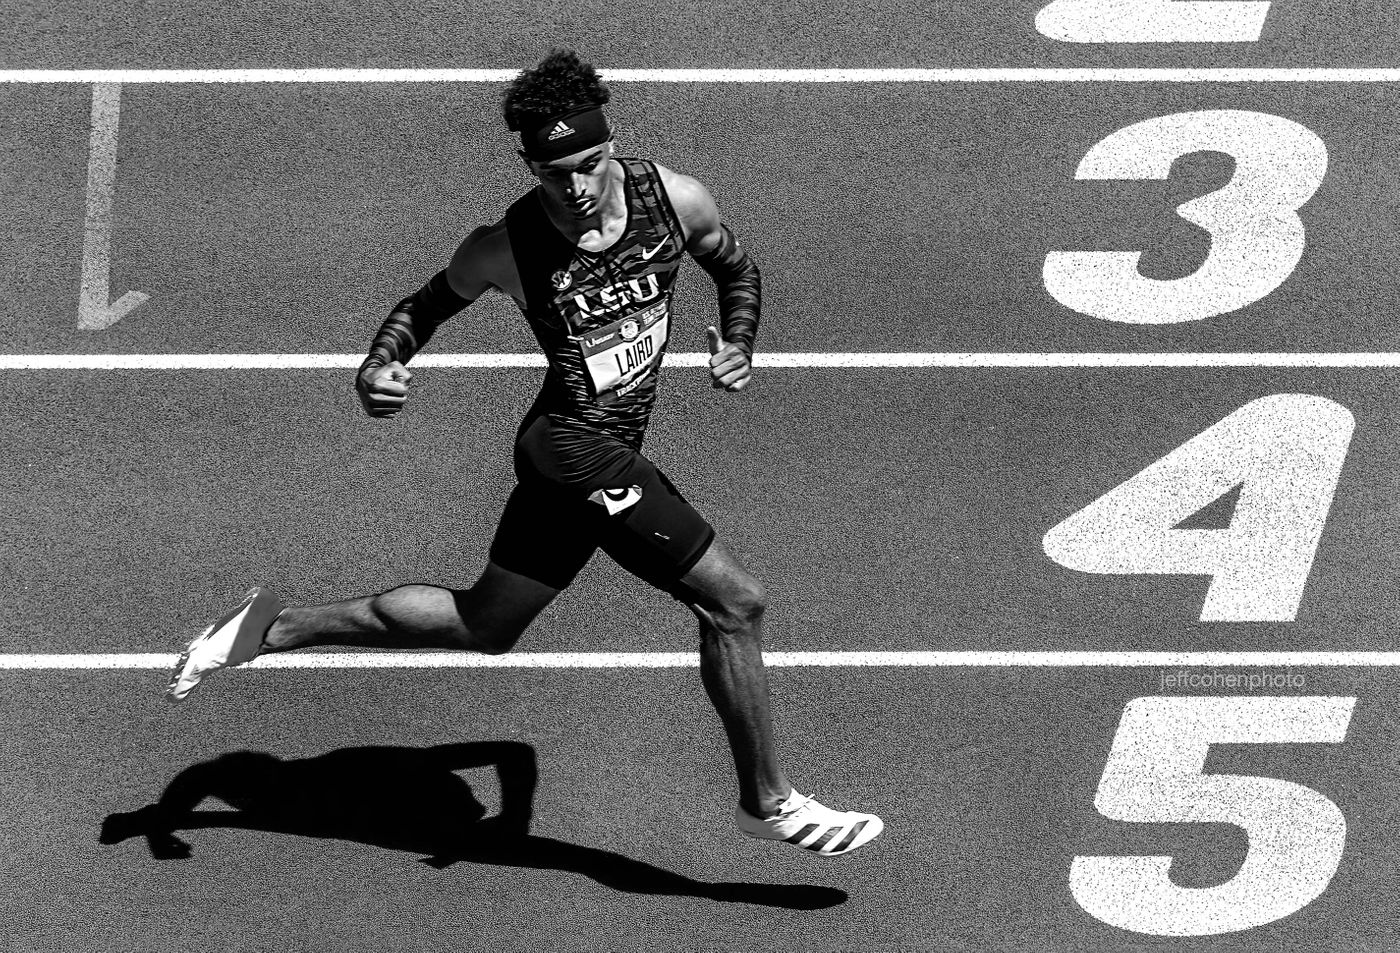 laird-200m-2021-US-Oly-Trials--day-6-296-jeff-cohen-photo---copy-web.jpg